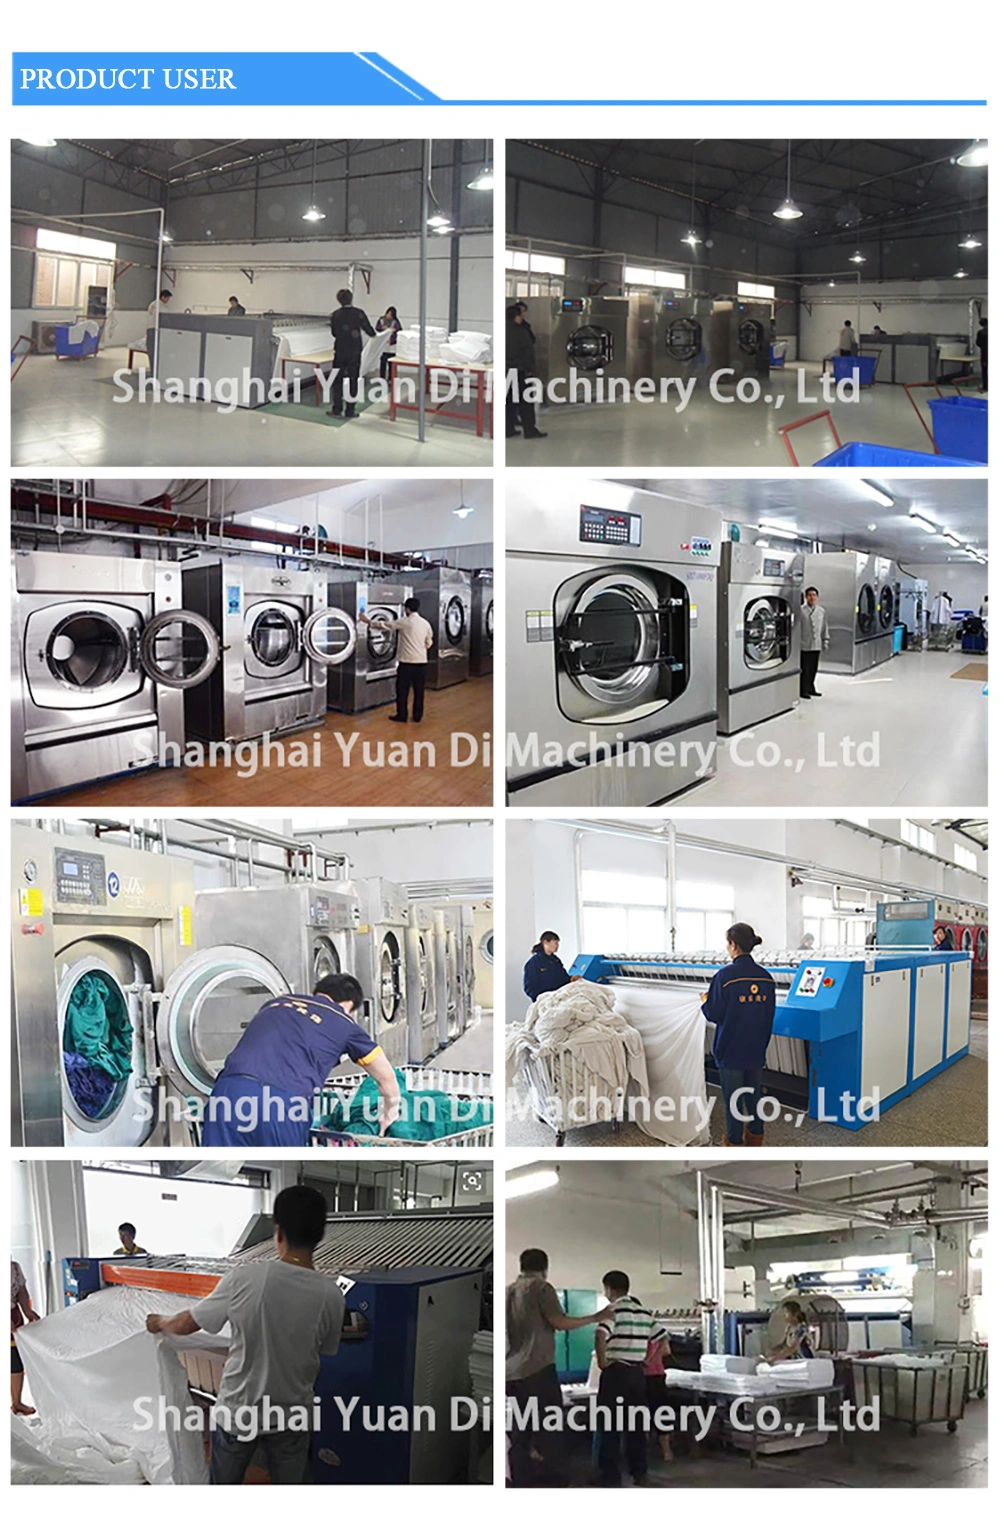 Industrial Commercial Laundry Machine Shop Tumble Dryer/Fully-Automatic Control Dryer Machine